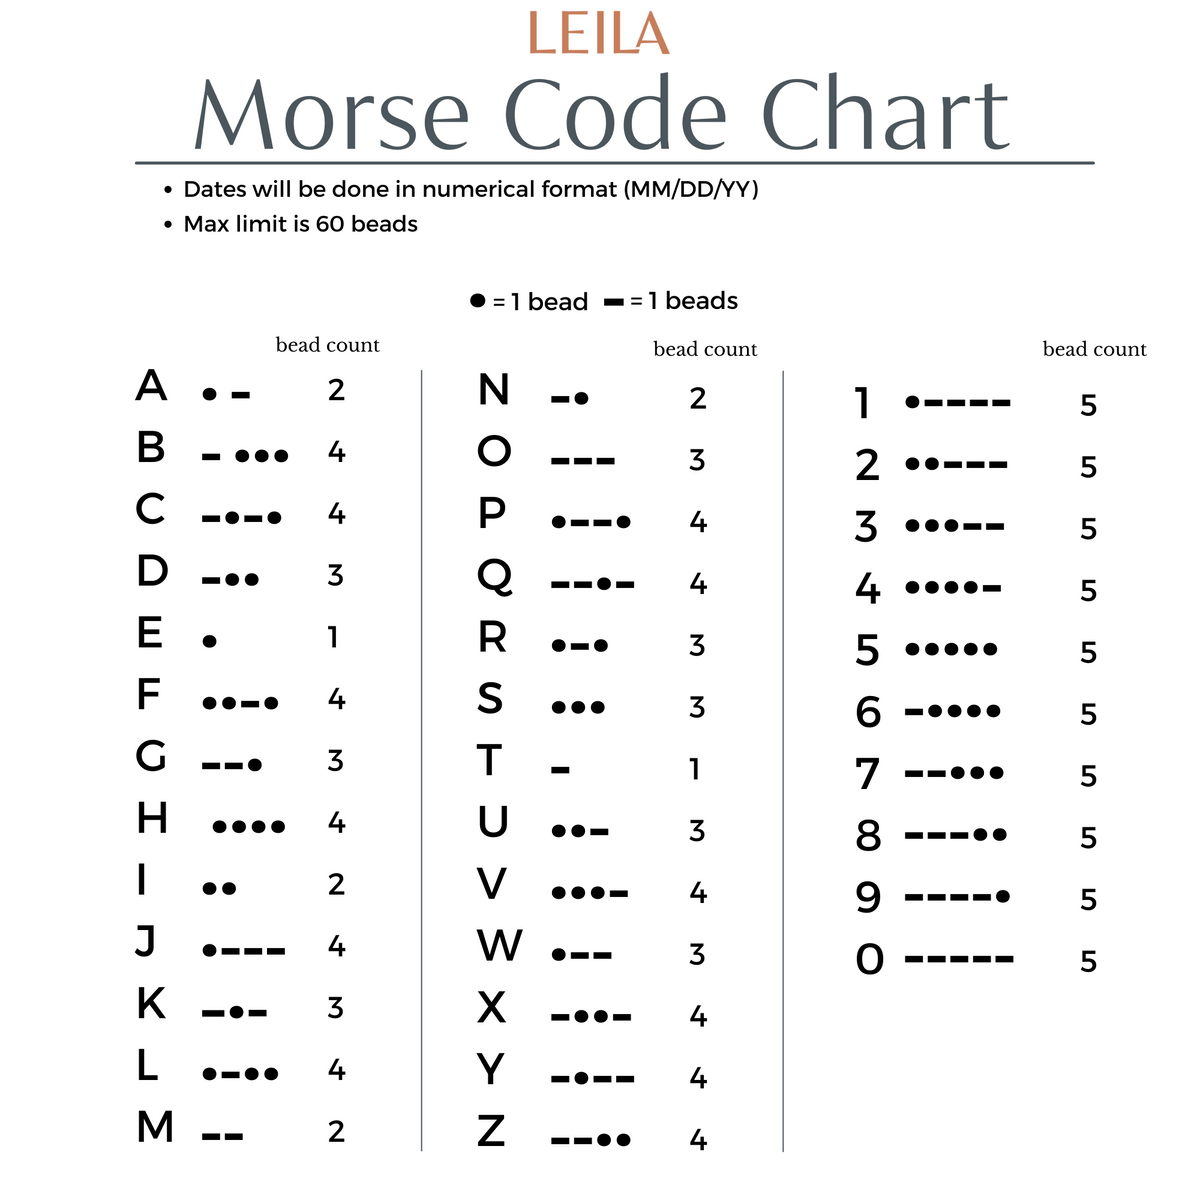 &quot;Never Stop Learning&quot; Morse Code